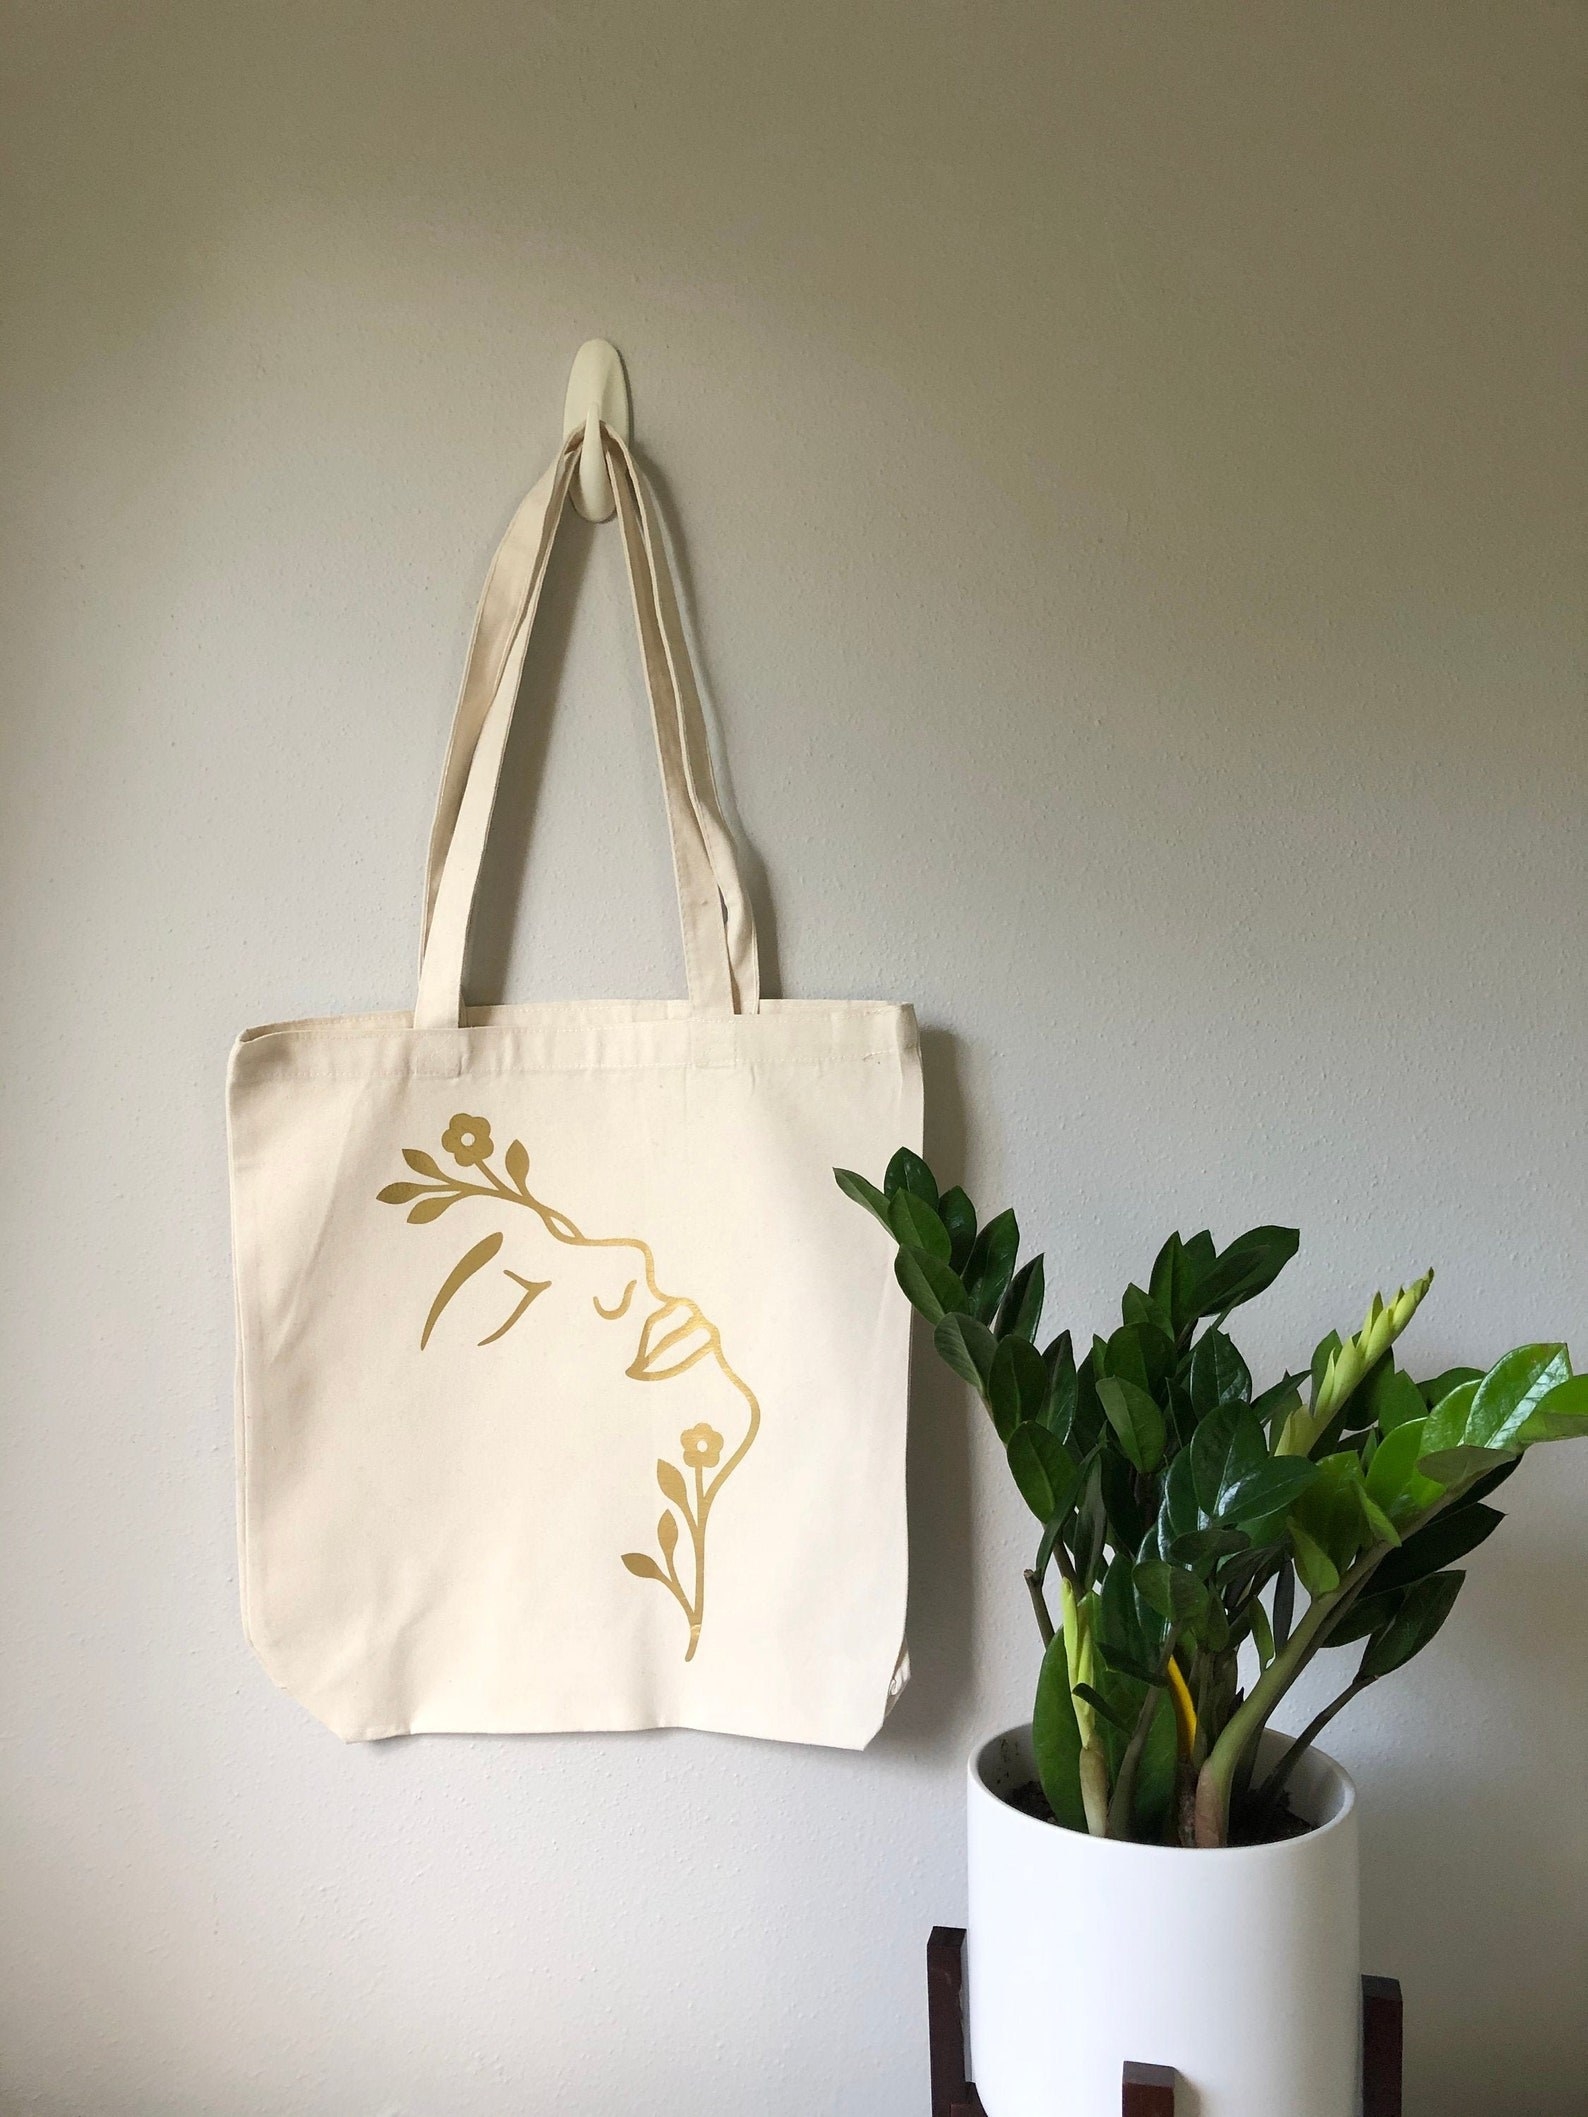 A white tote bag with a gold design featuring a woman&#x27;s face and flowers